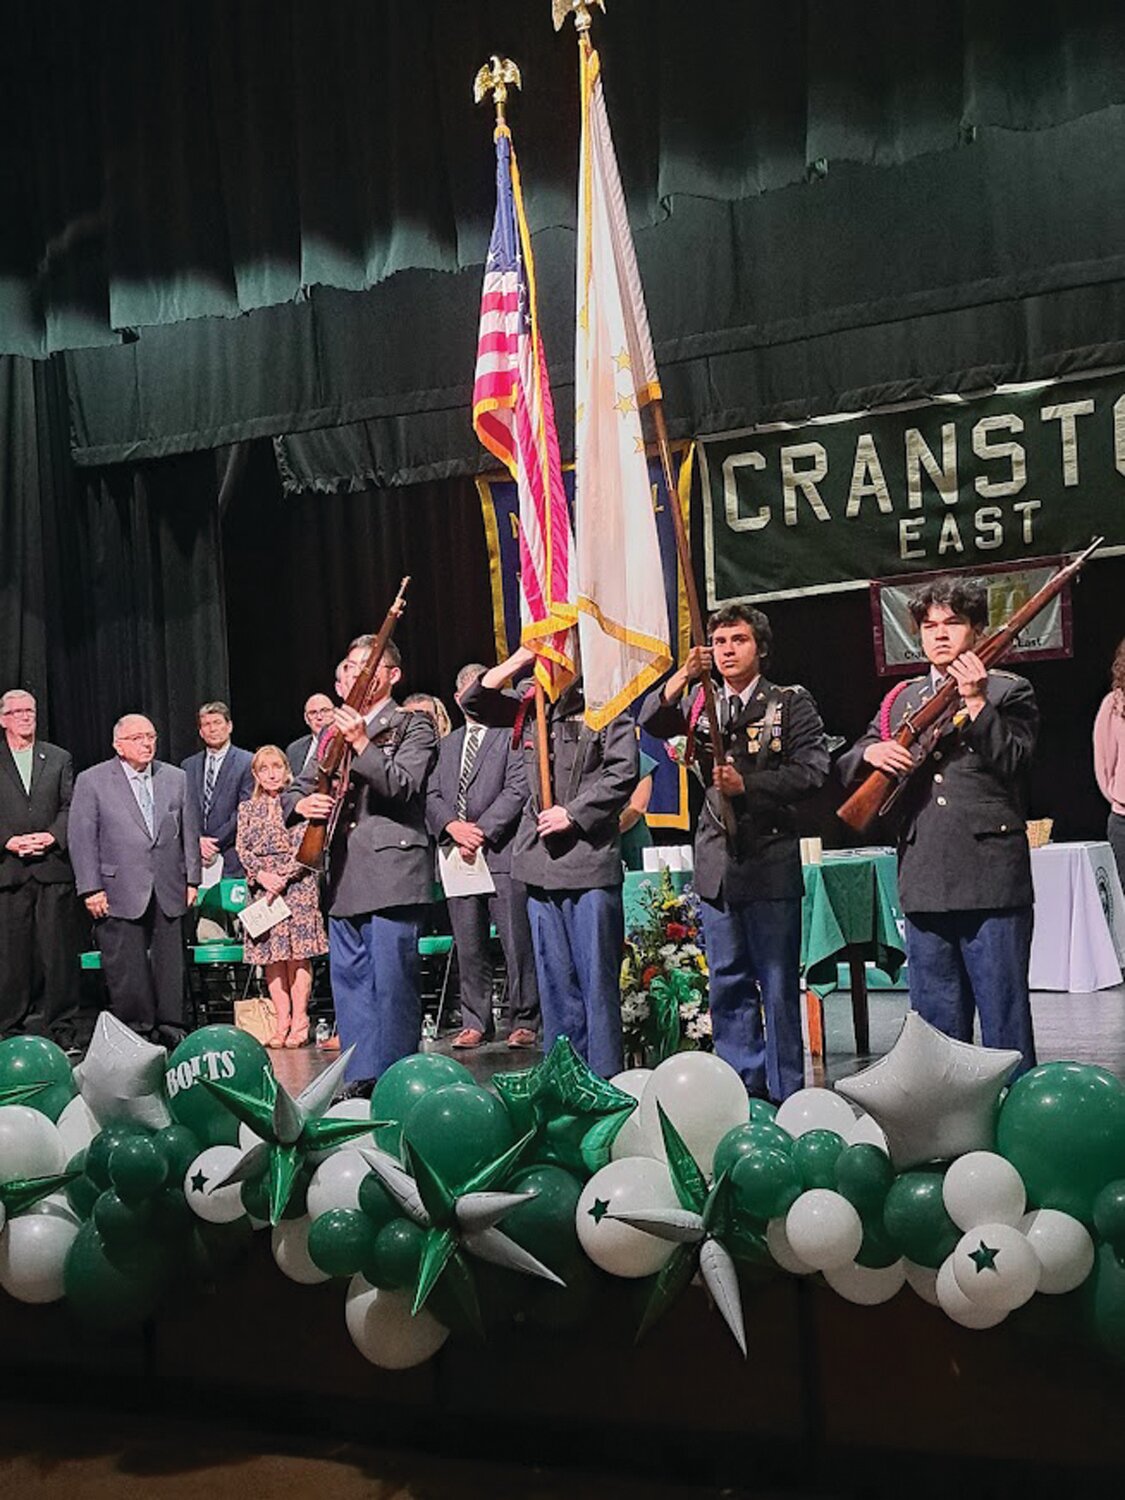 STANDING TOGETHER: JROTC presents the colors as the National Anthem is sung. (Photos courtesy of Cranston Public Schools)